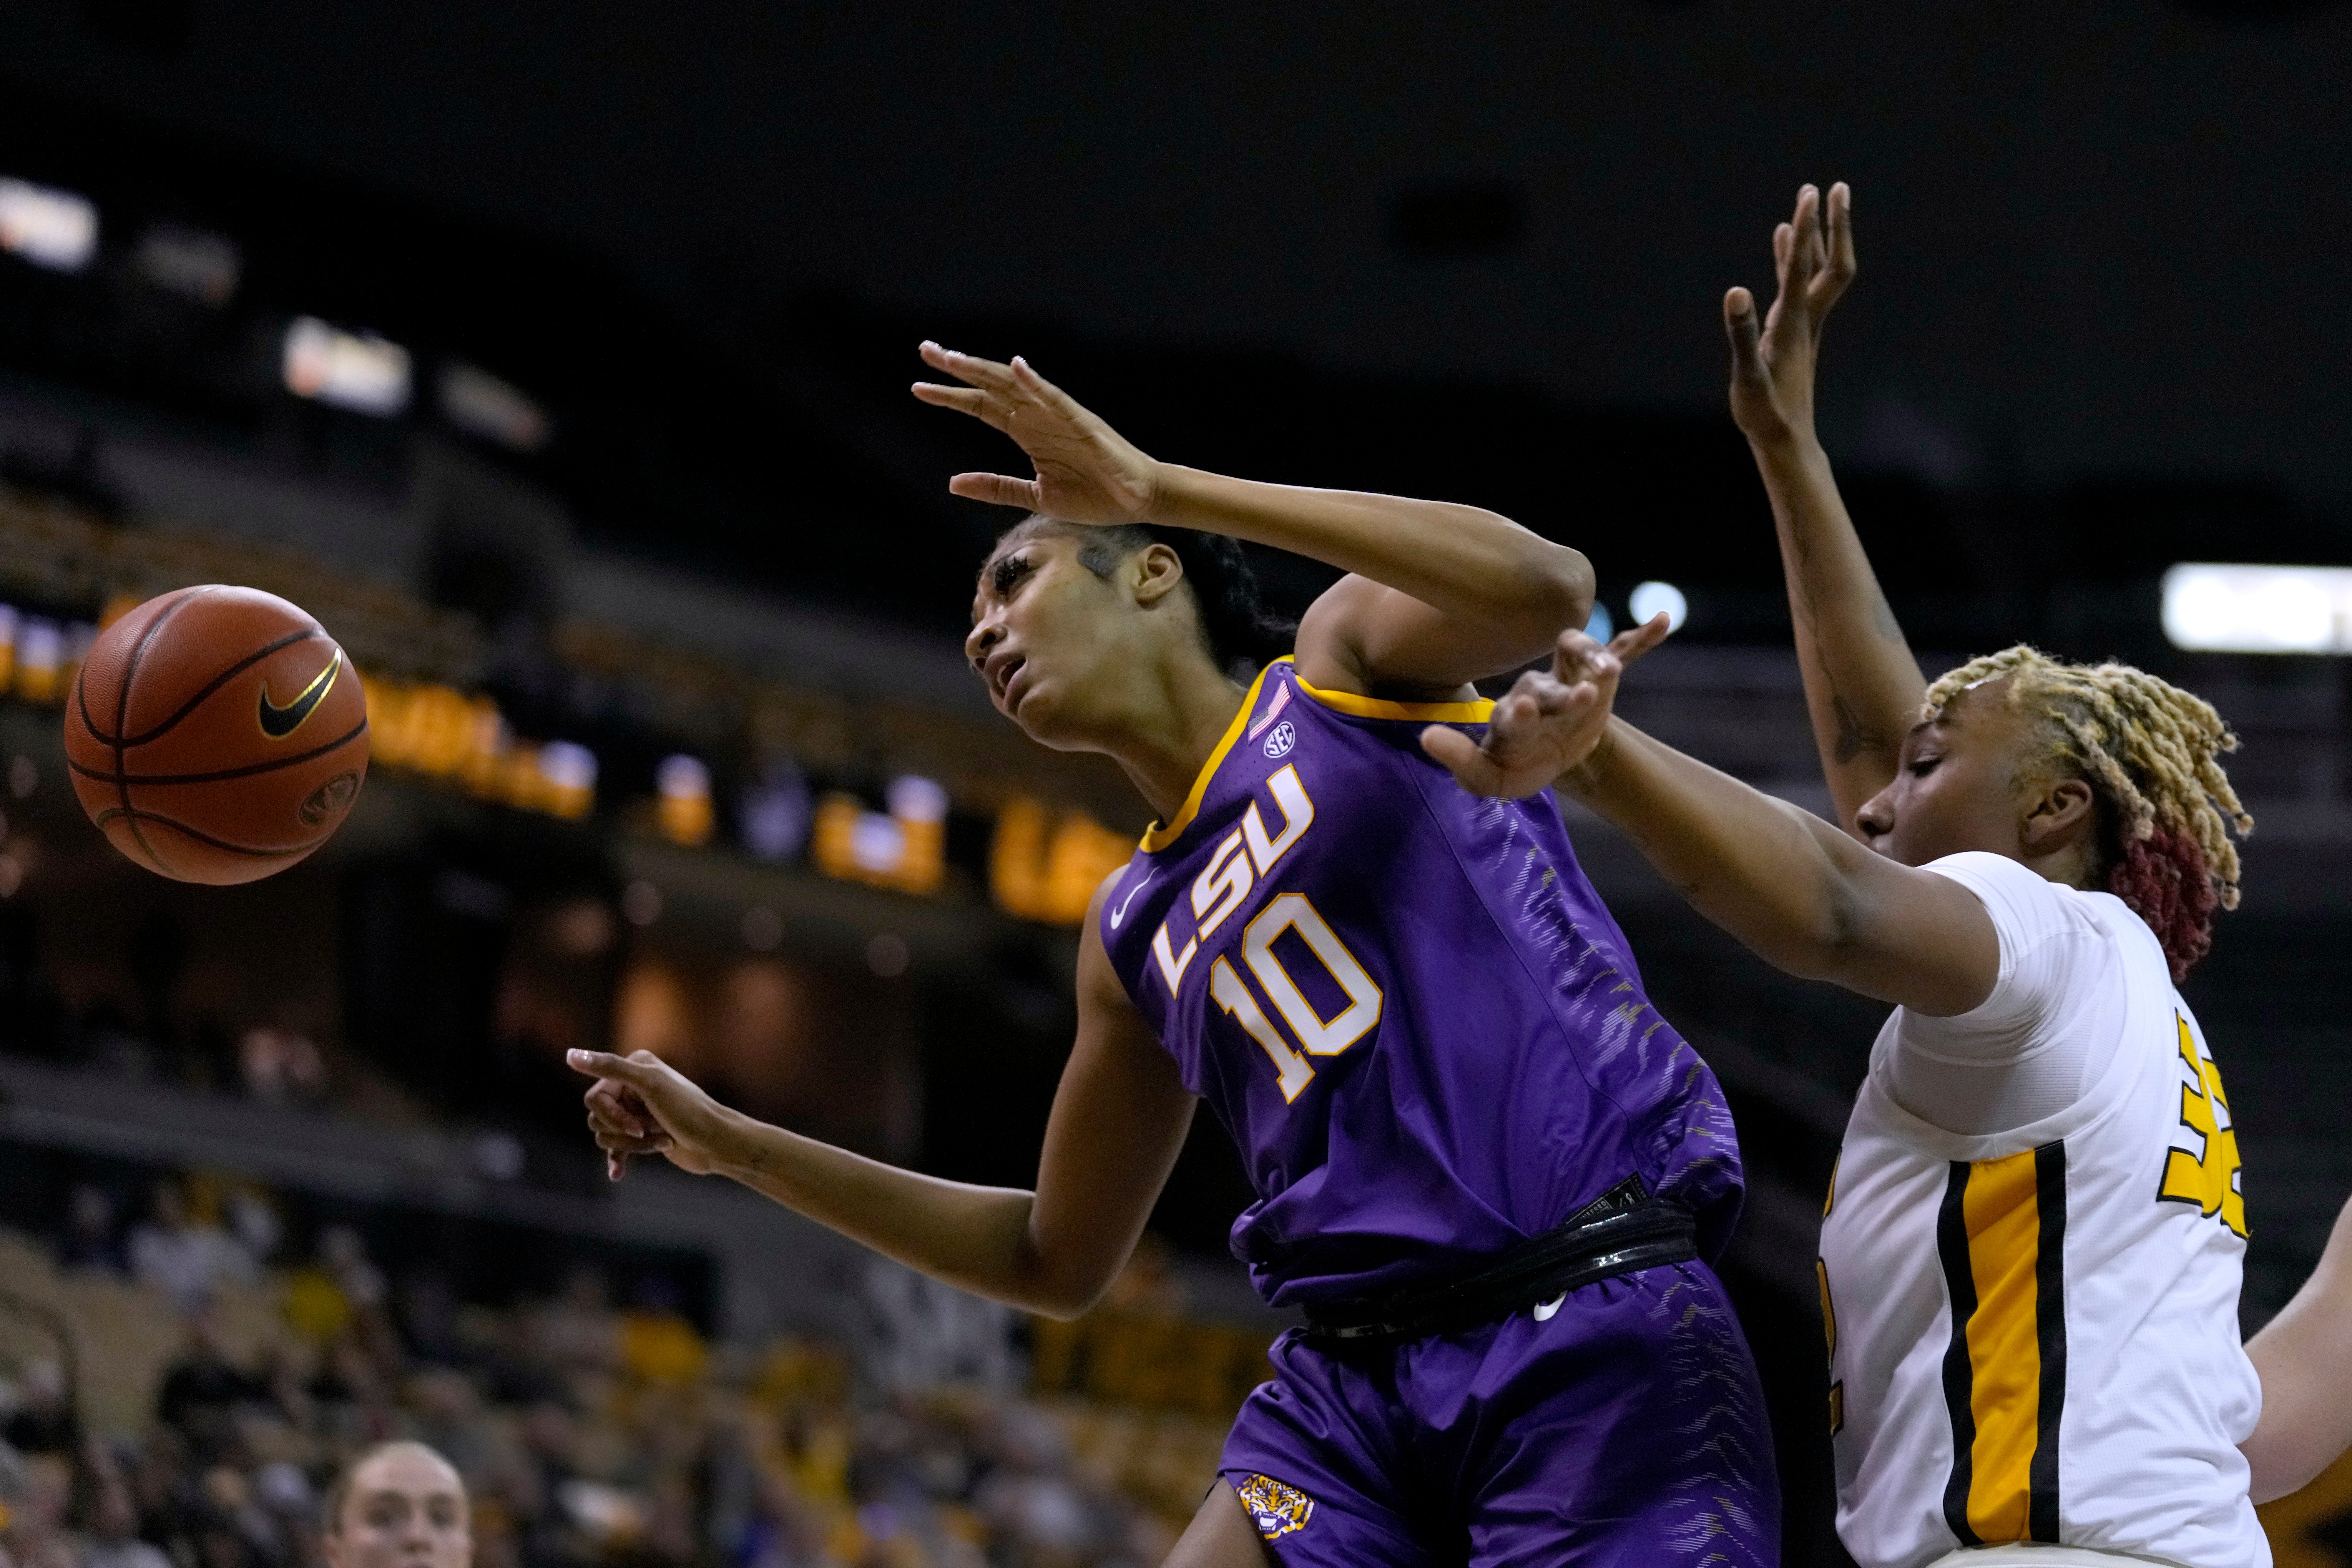 Missouri's Jayla Kelly, right, knocks the ball away from LSU's Angel Reese (10) during the second half of an NCAA college basketball game Thursday, Jan. 12, 2023, in Columbia, Mo. (AP Photo/Jeff Roberson)